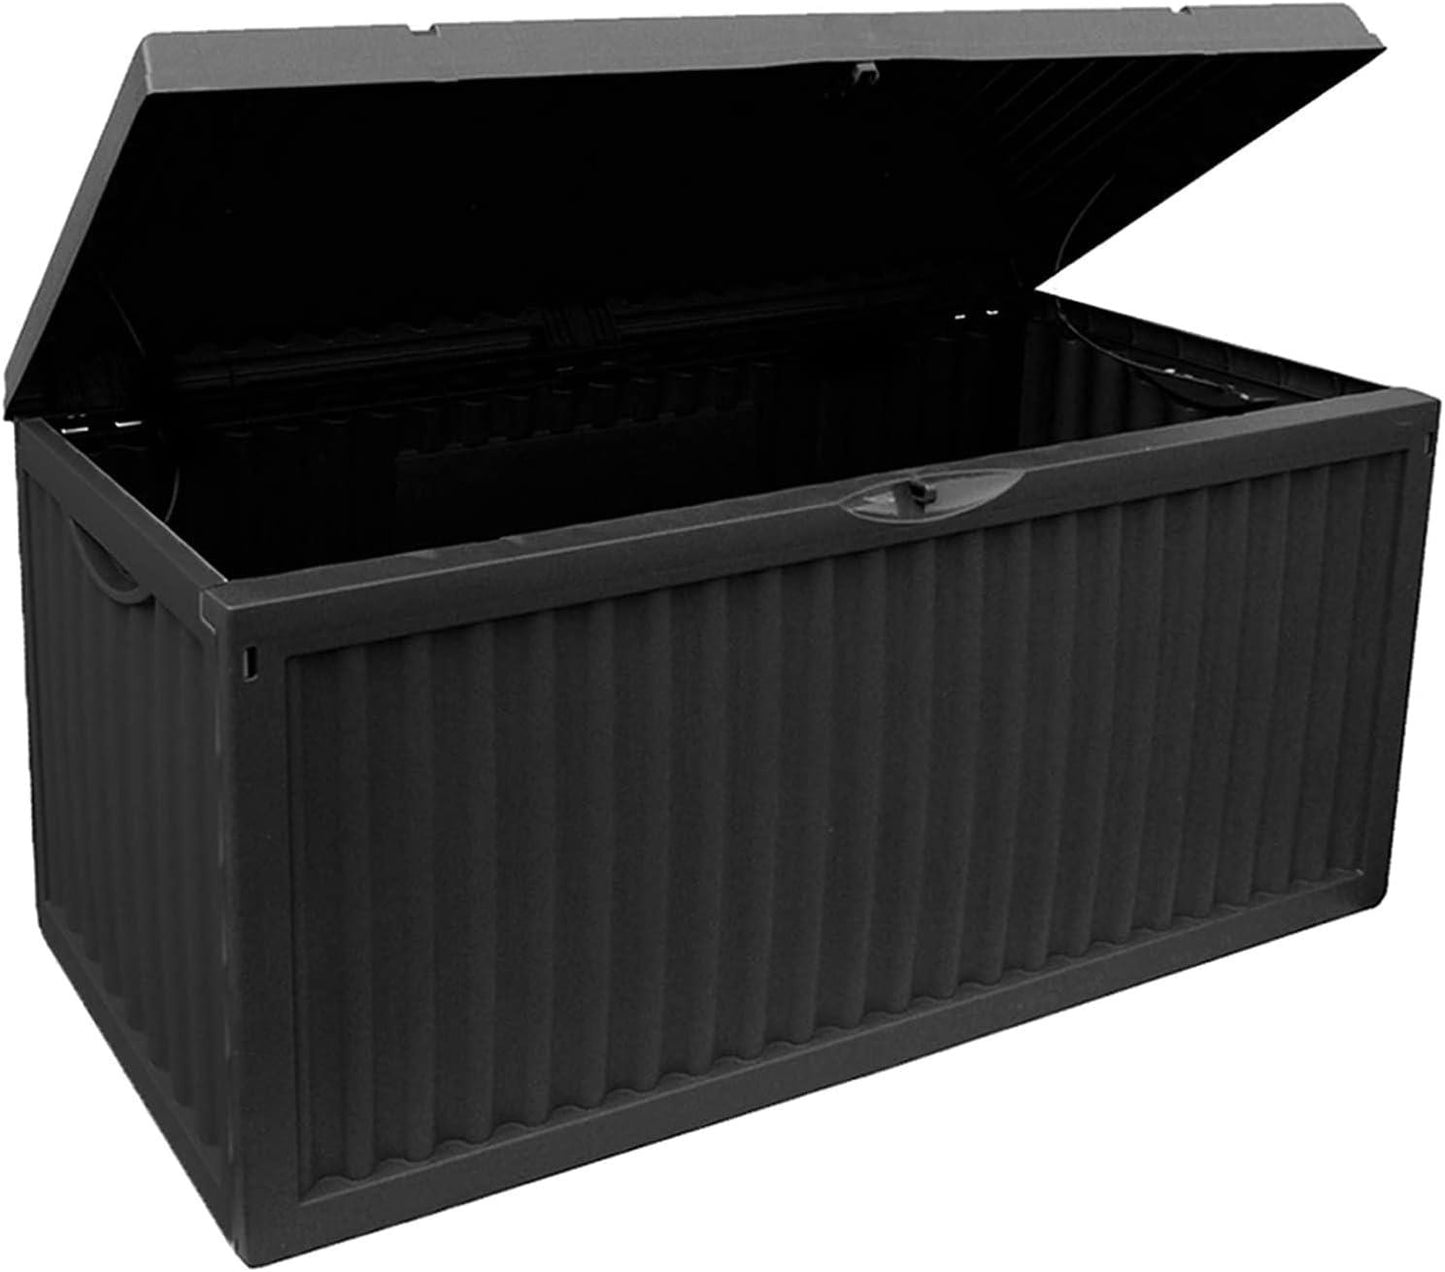 336L Large Outdoor Garden Plastic Storage Box Container